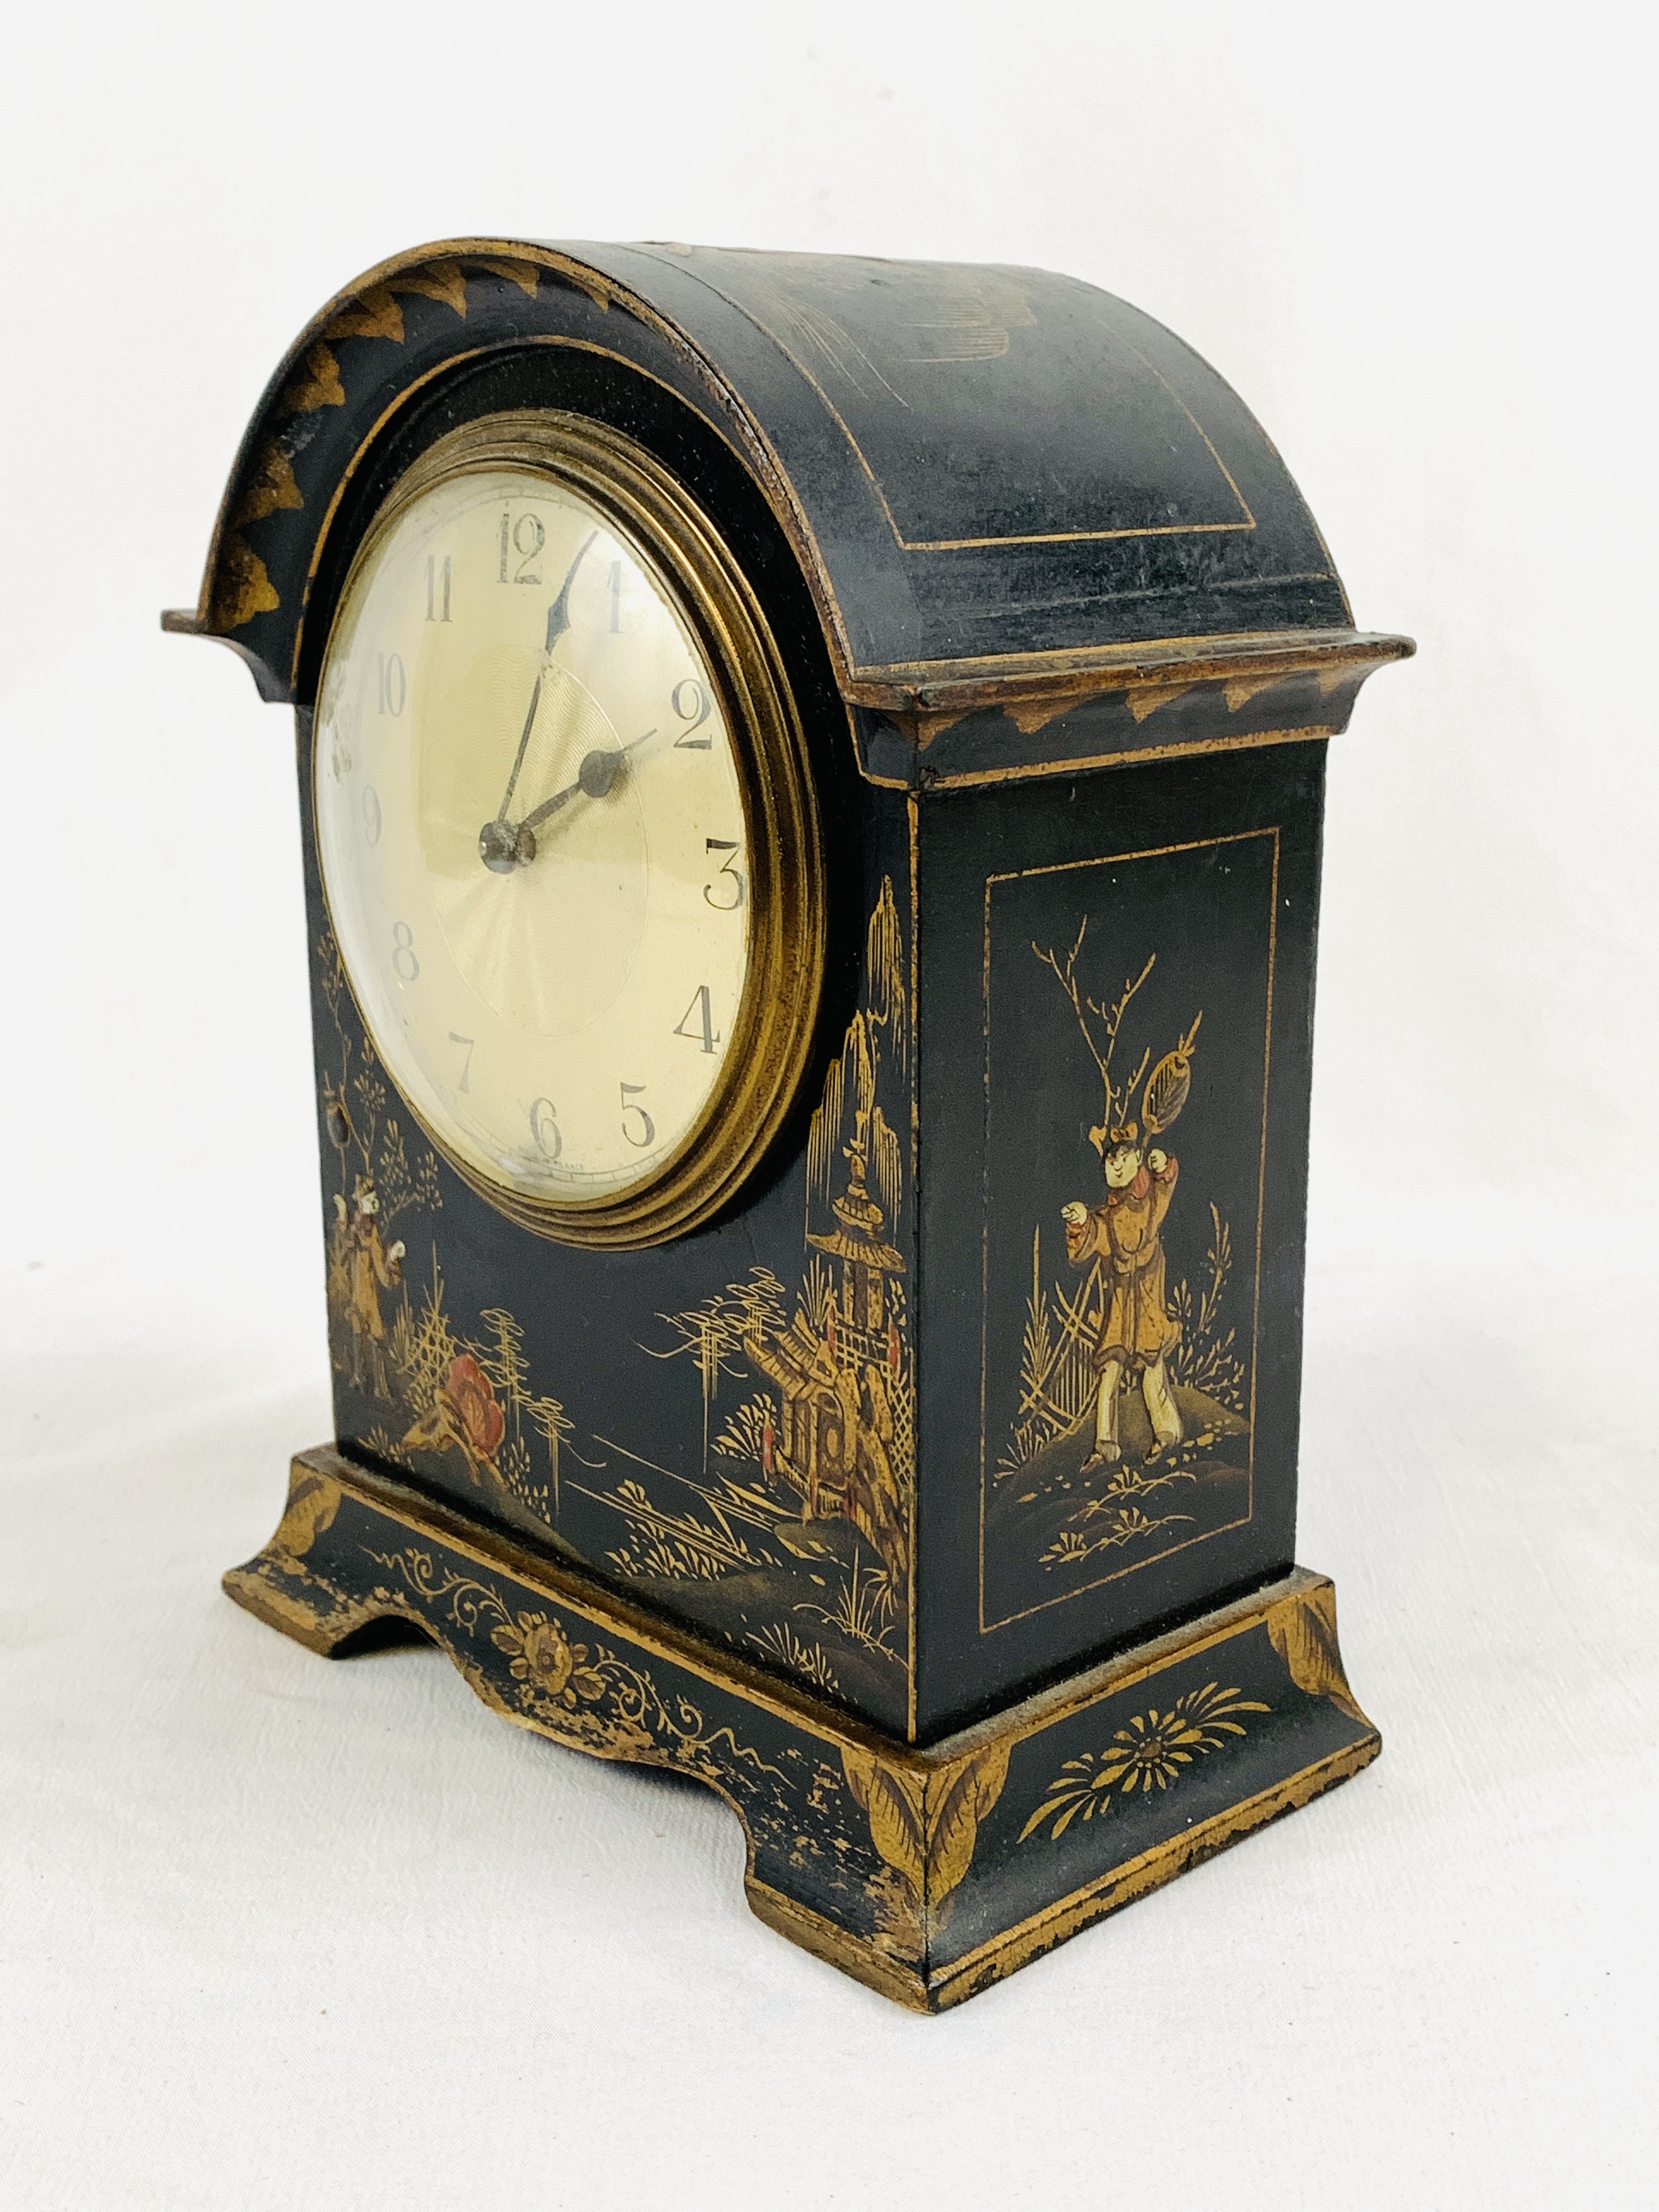 Chinoiserie mantel clock - Image 2 of 4